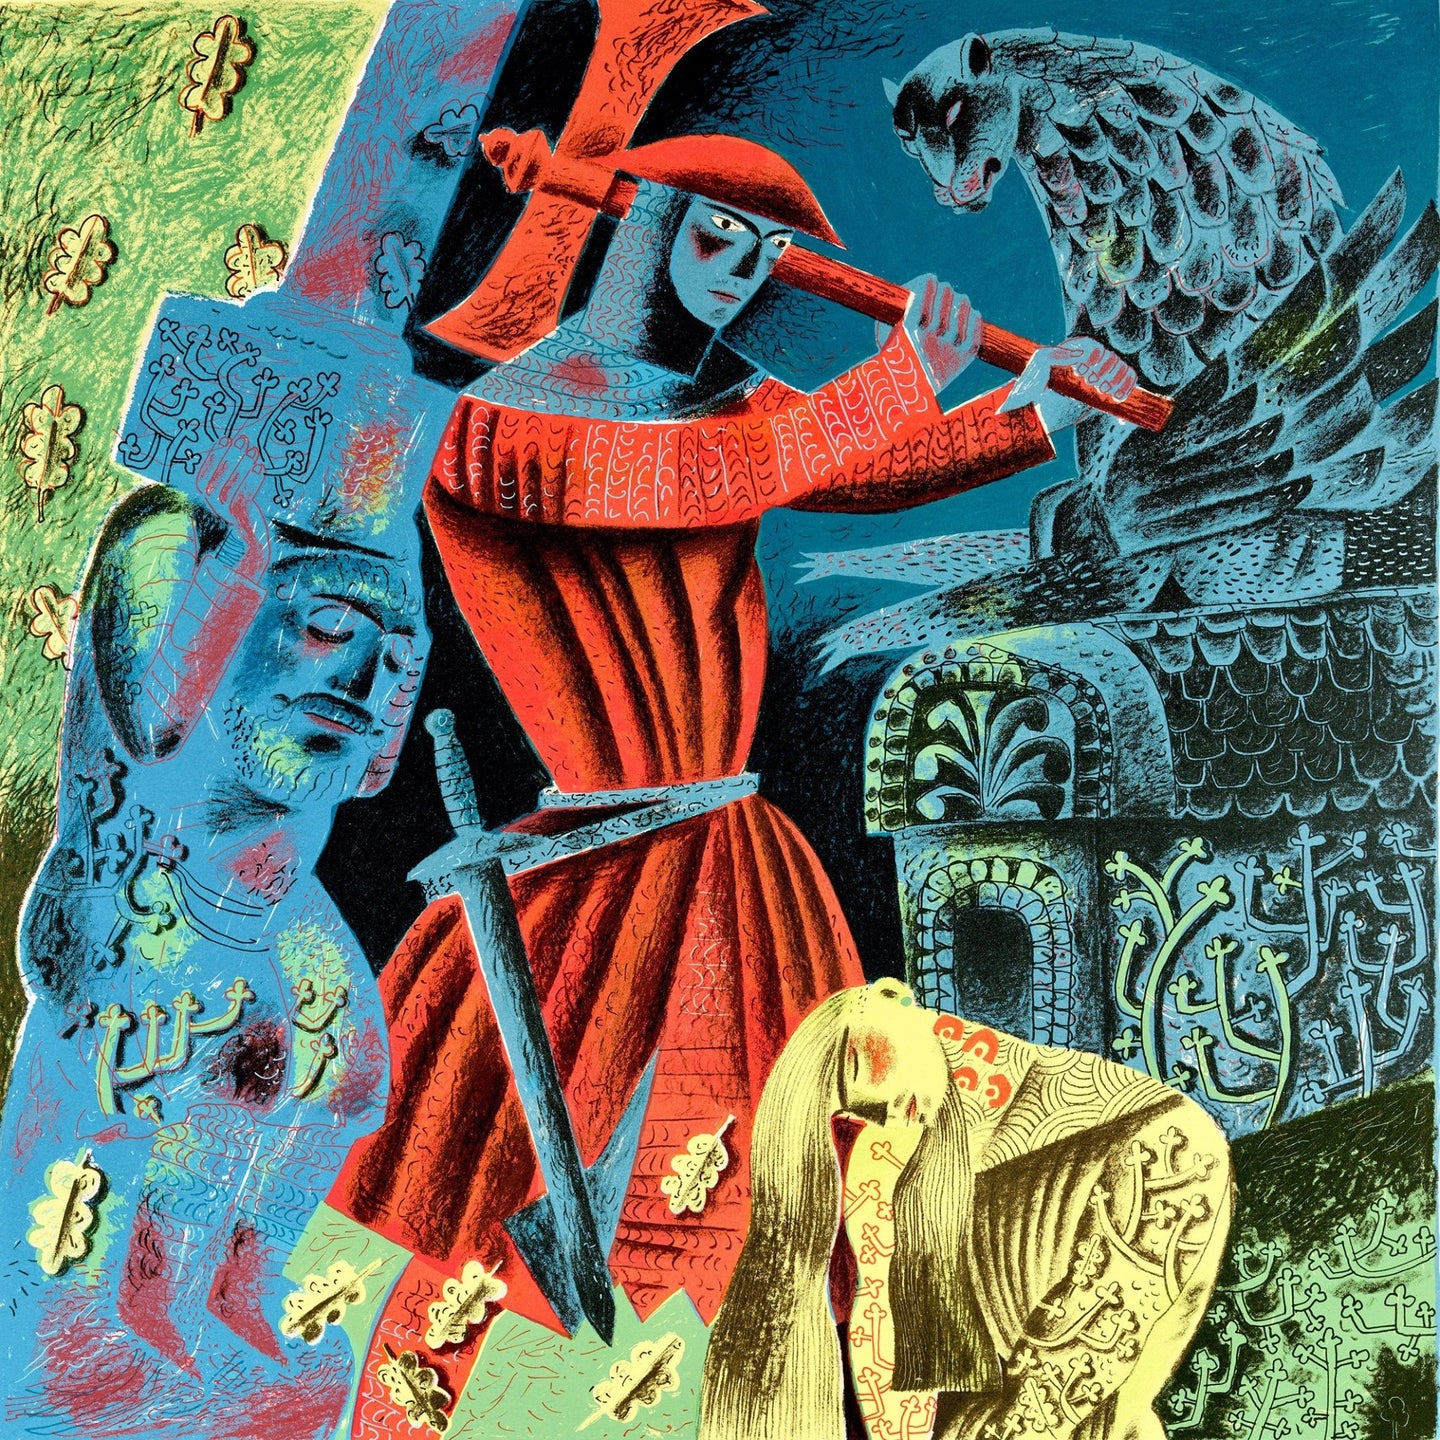 The Green Knight Bows to Gawain's Blow, an original screen print by Clive Hicks-Jenkins and the Penfold Press 